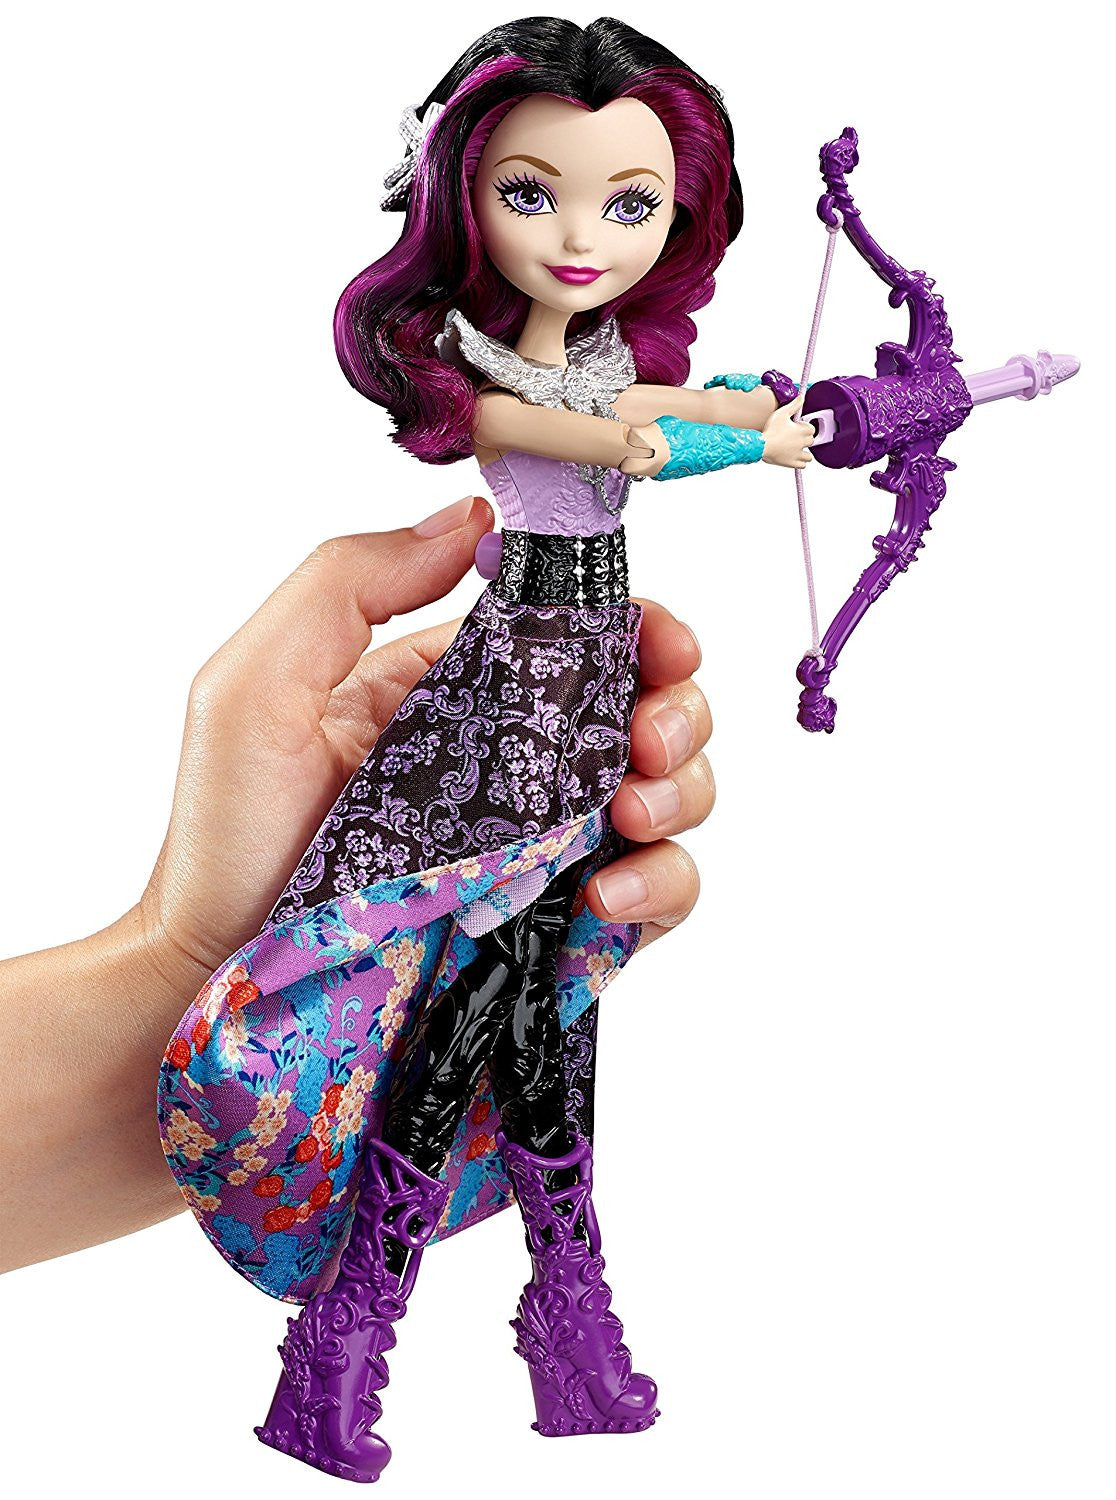 raven ever after high doll